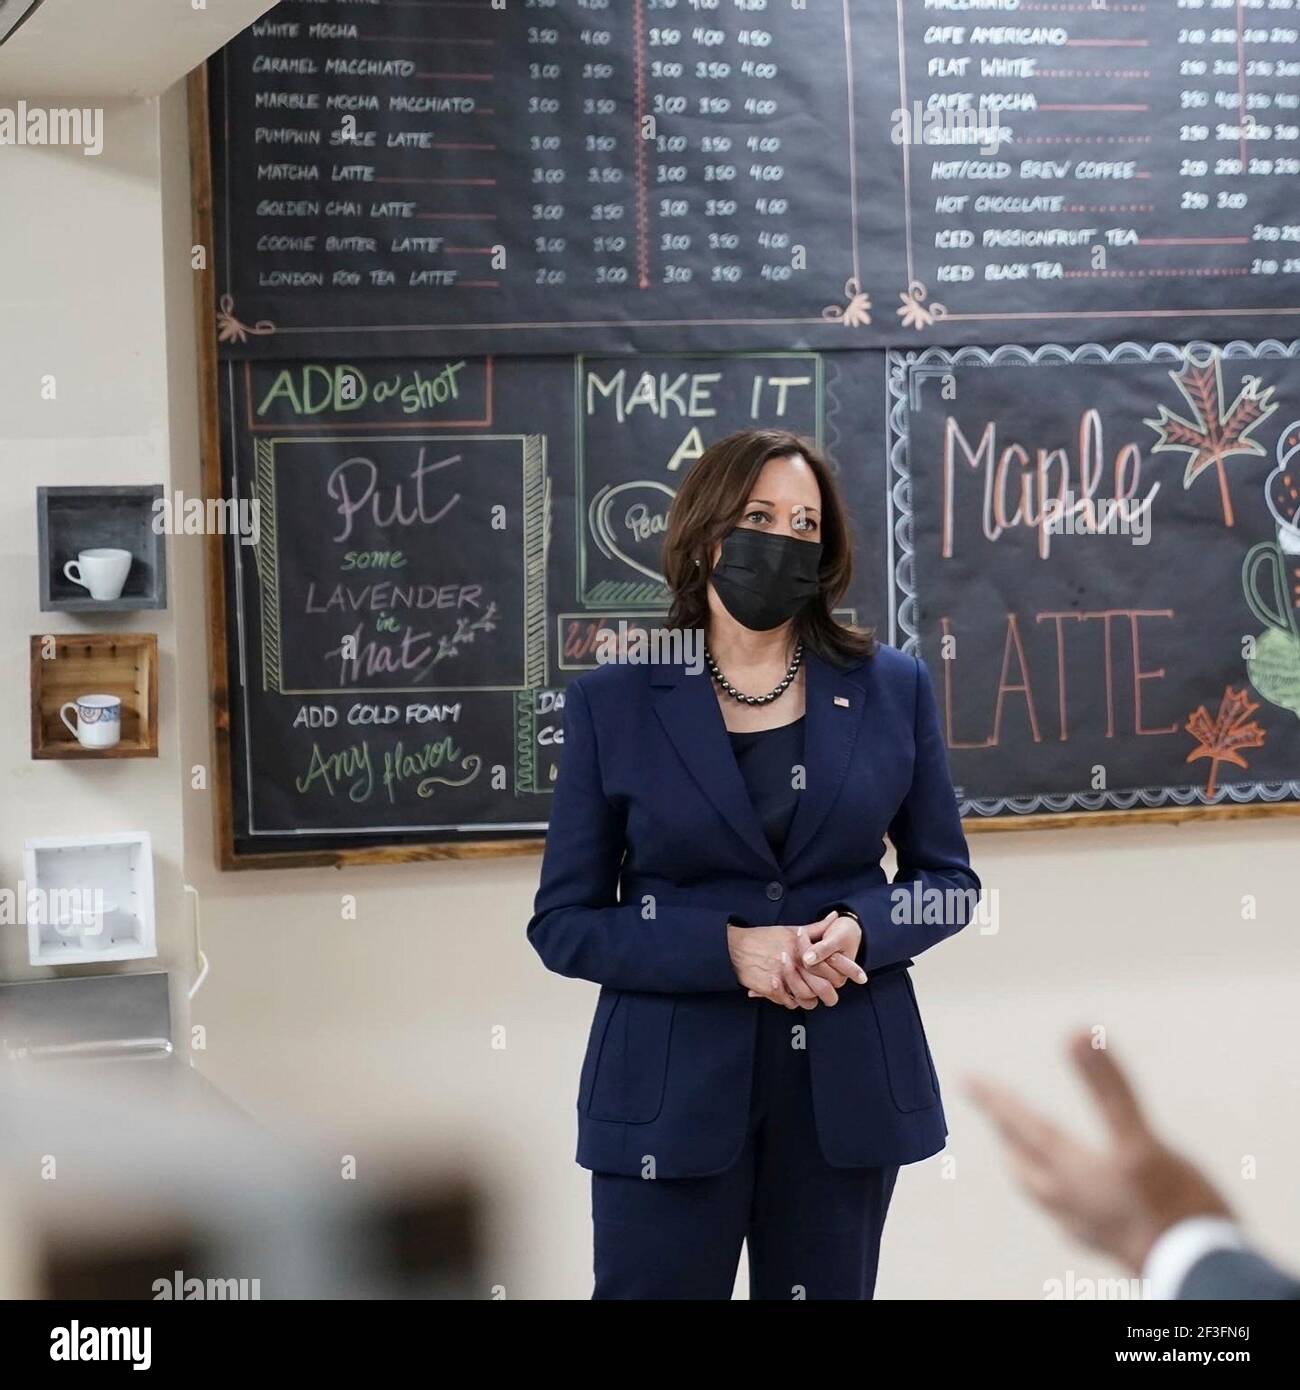 U.S Vice President Kamala Harris, decides what drink she wants to order during a visit to the Culinary Union at the Culinary Academy of Las Vegas, March 15, 2021 in Las Vegas, Nevada. Credit: Planetpix/Alamy Live News Stock Photo